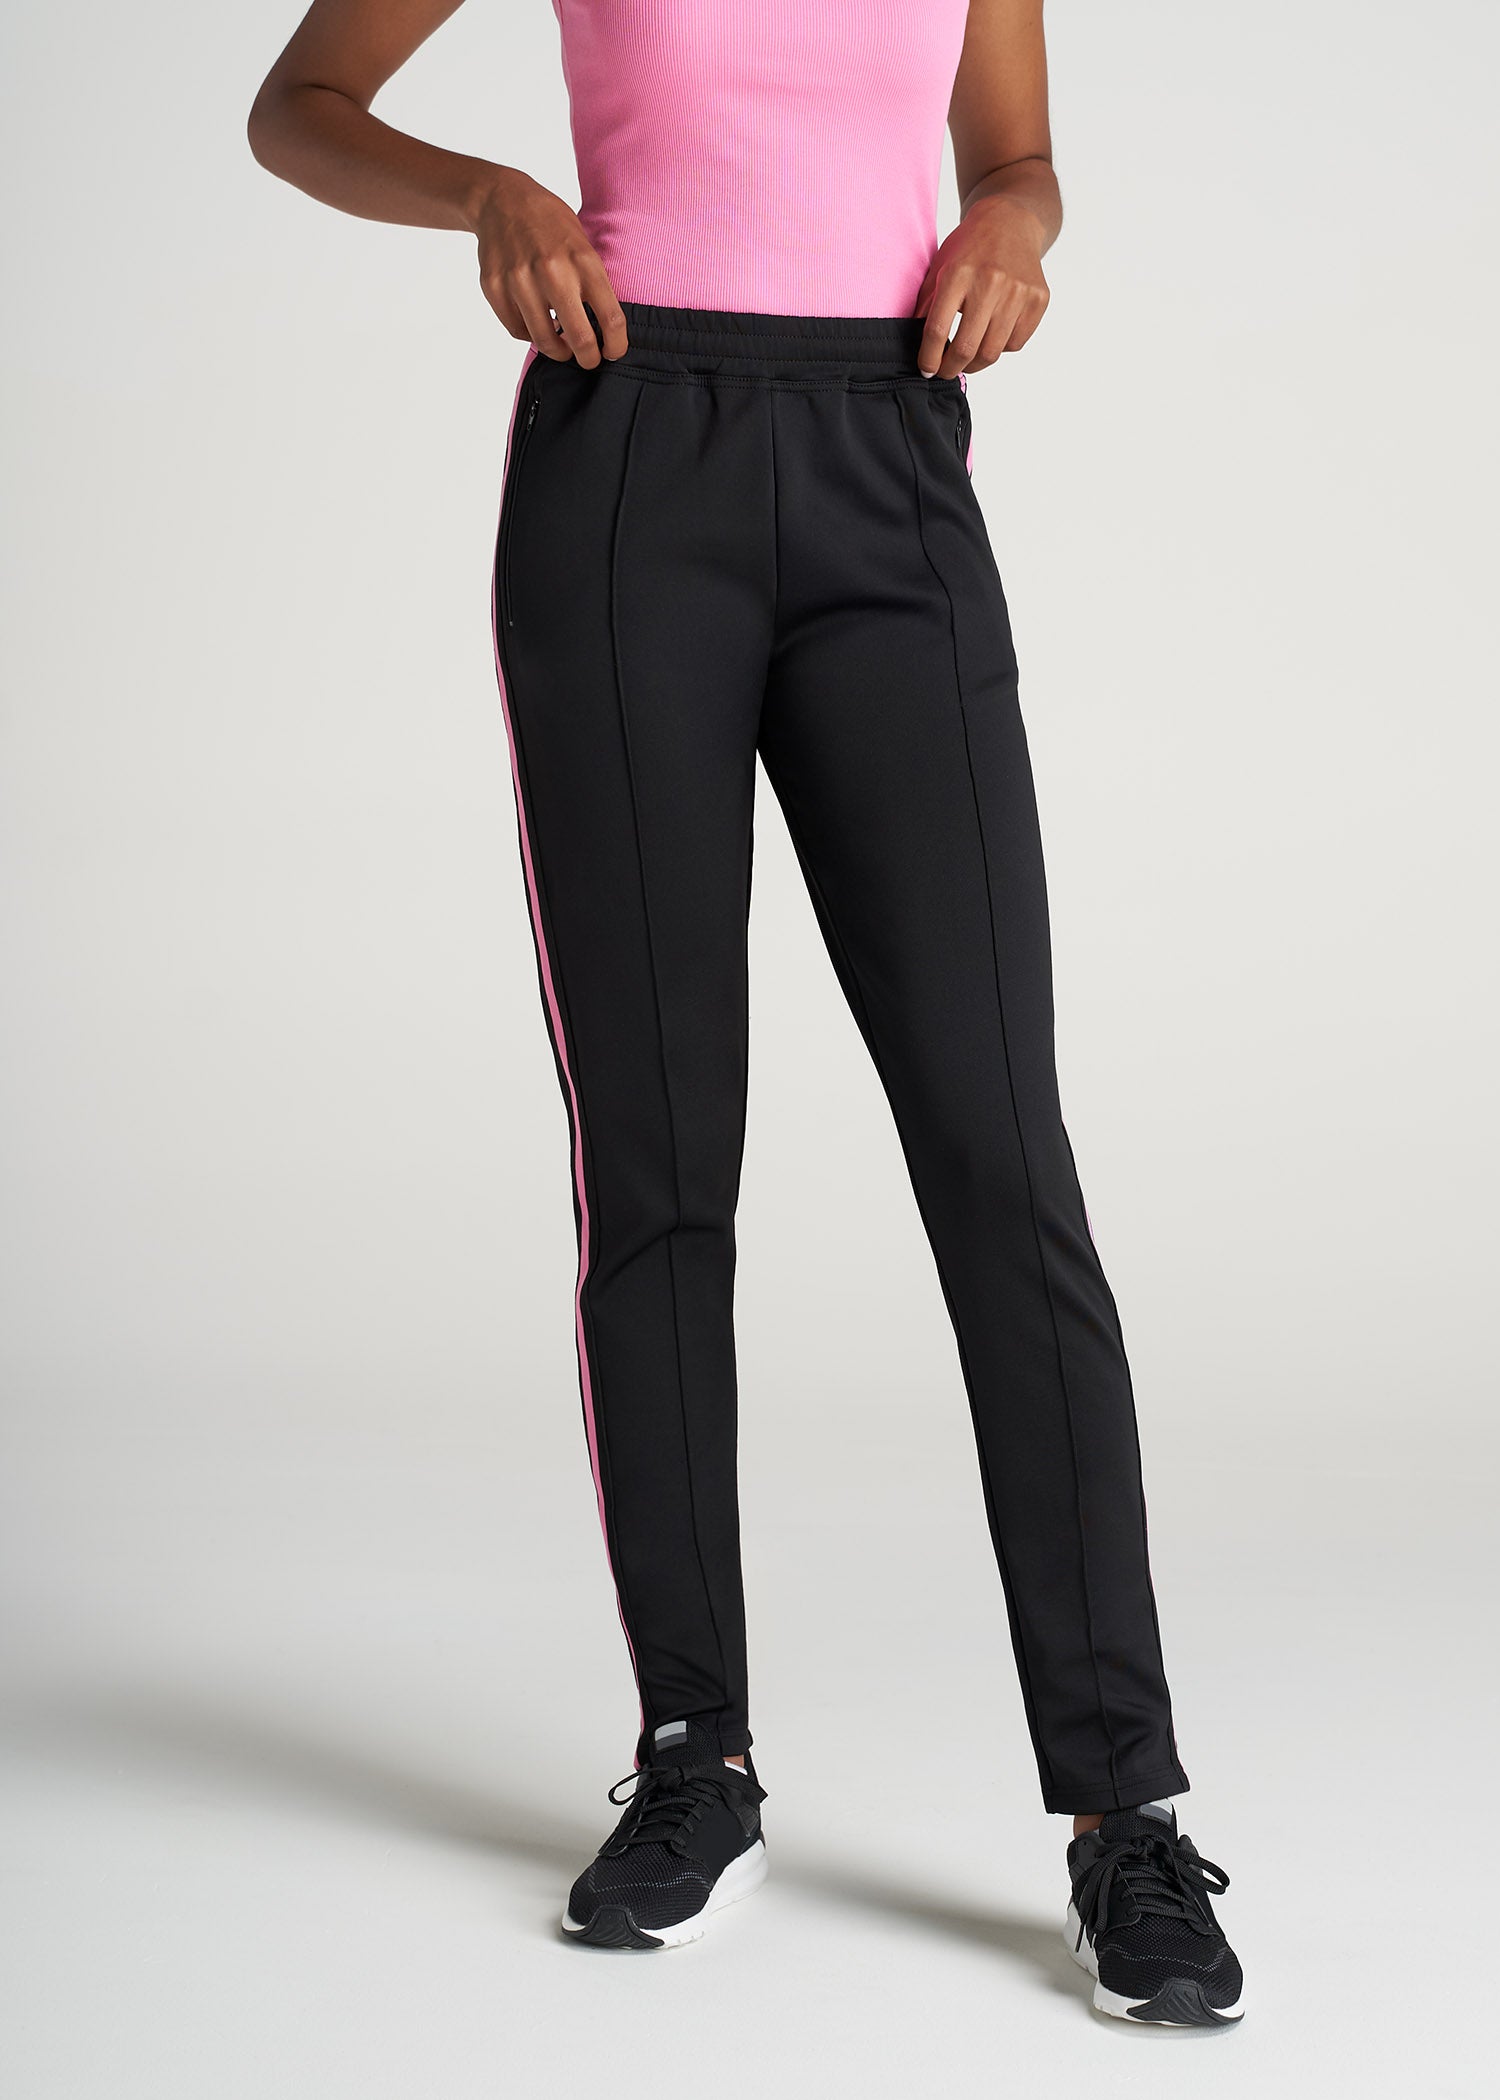 Athletic Works Black Women's Active Athletic Joggers Pocket Large